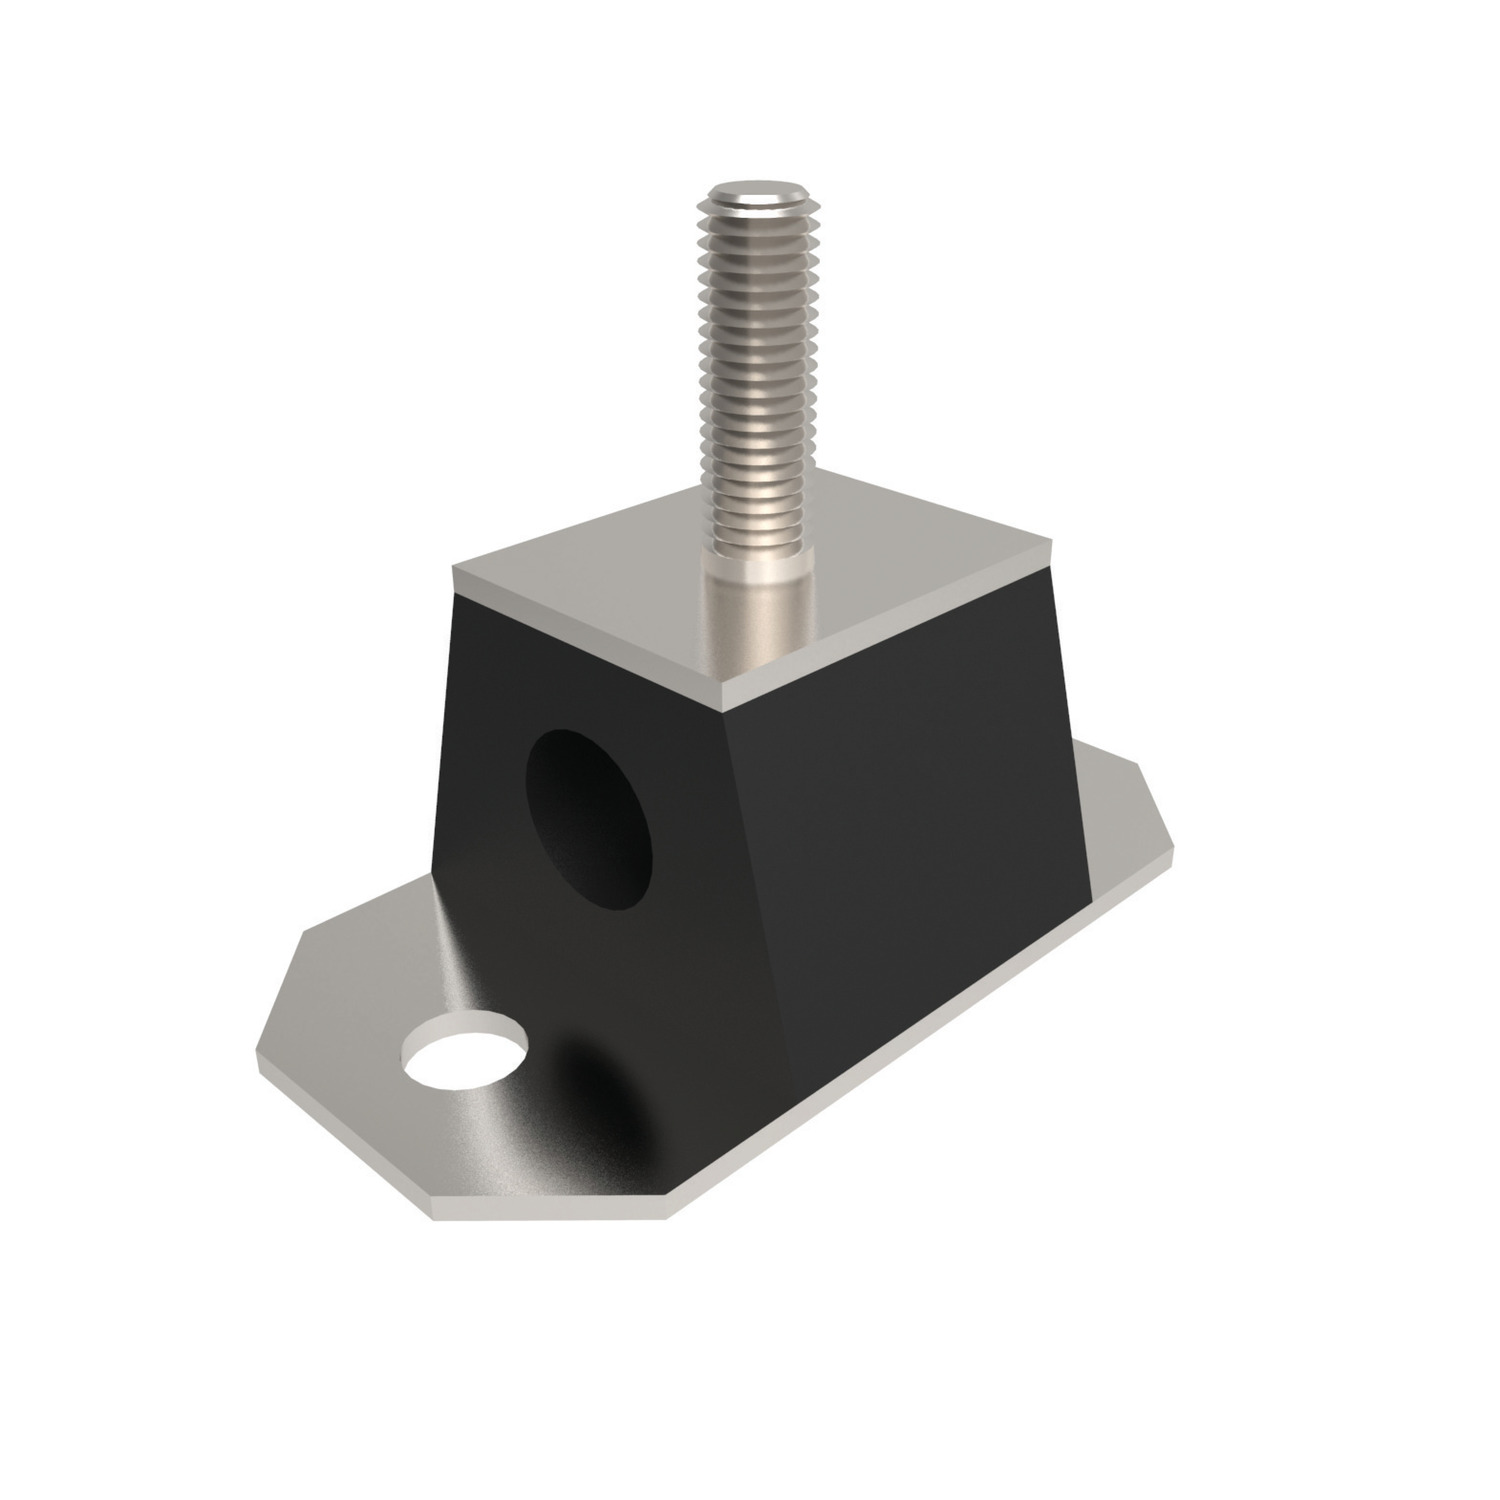 Product 61480, Anti-vibration Mounts with through holes / 